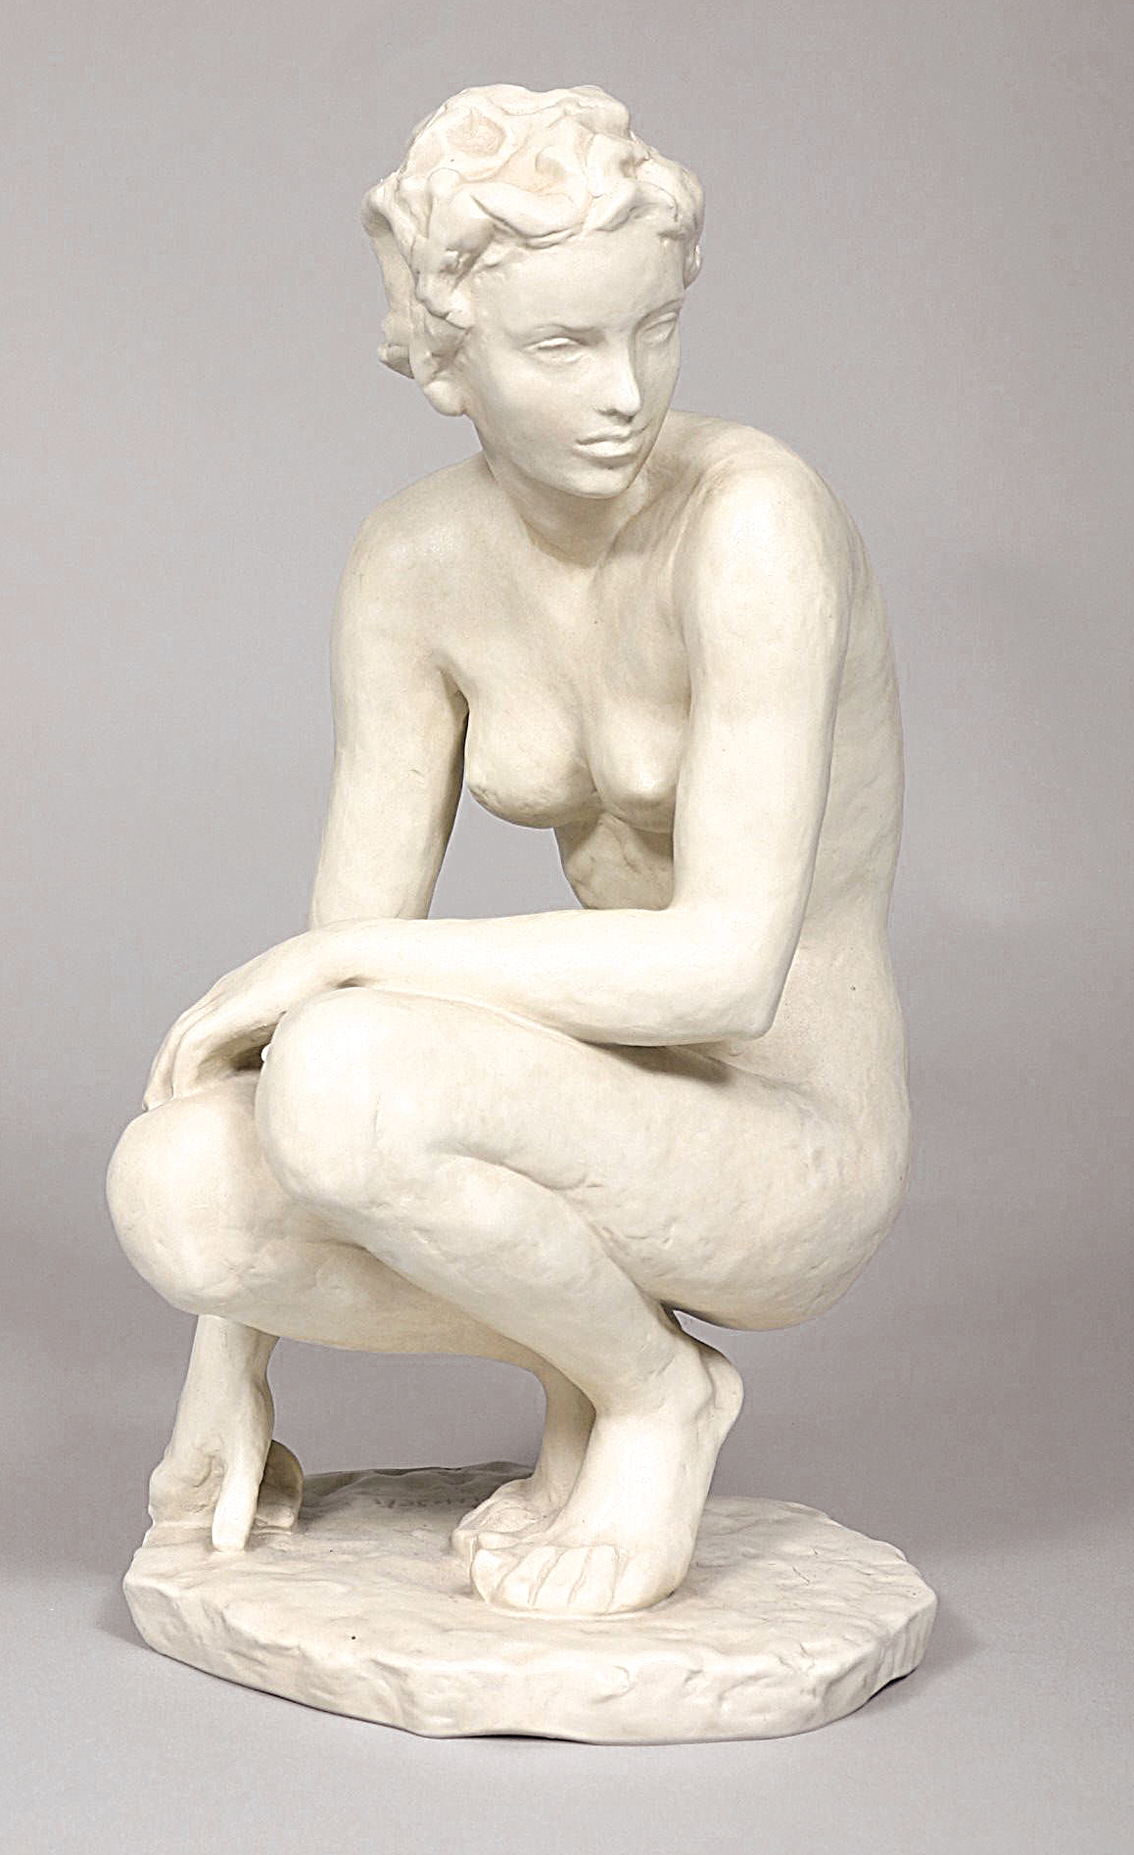 A figure of a crouching nude in biscuit porcelain